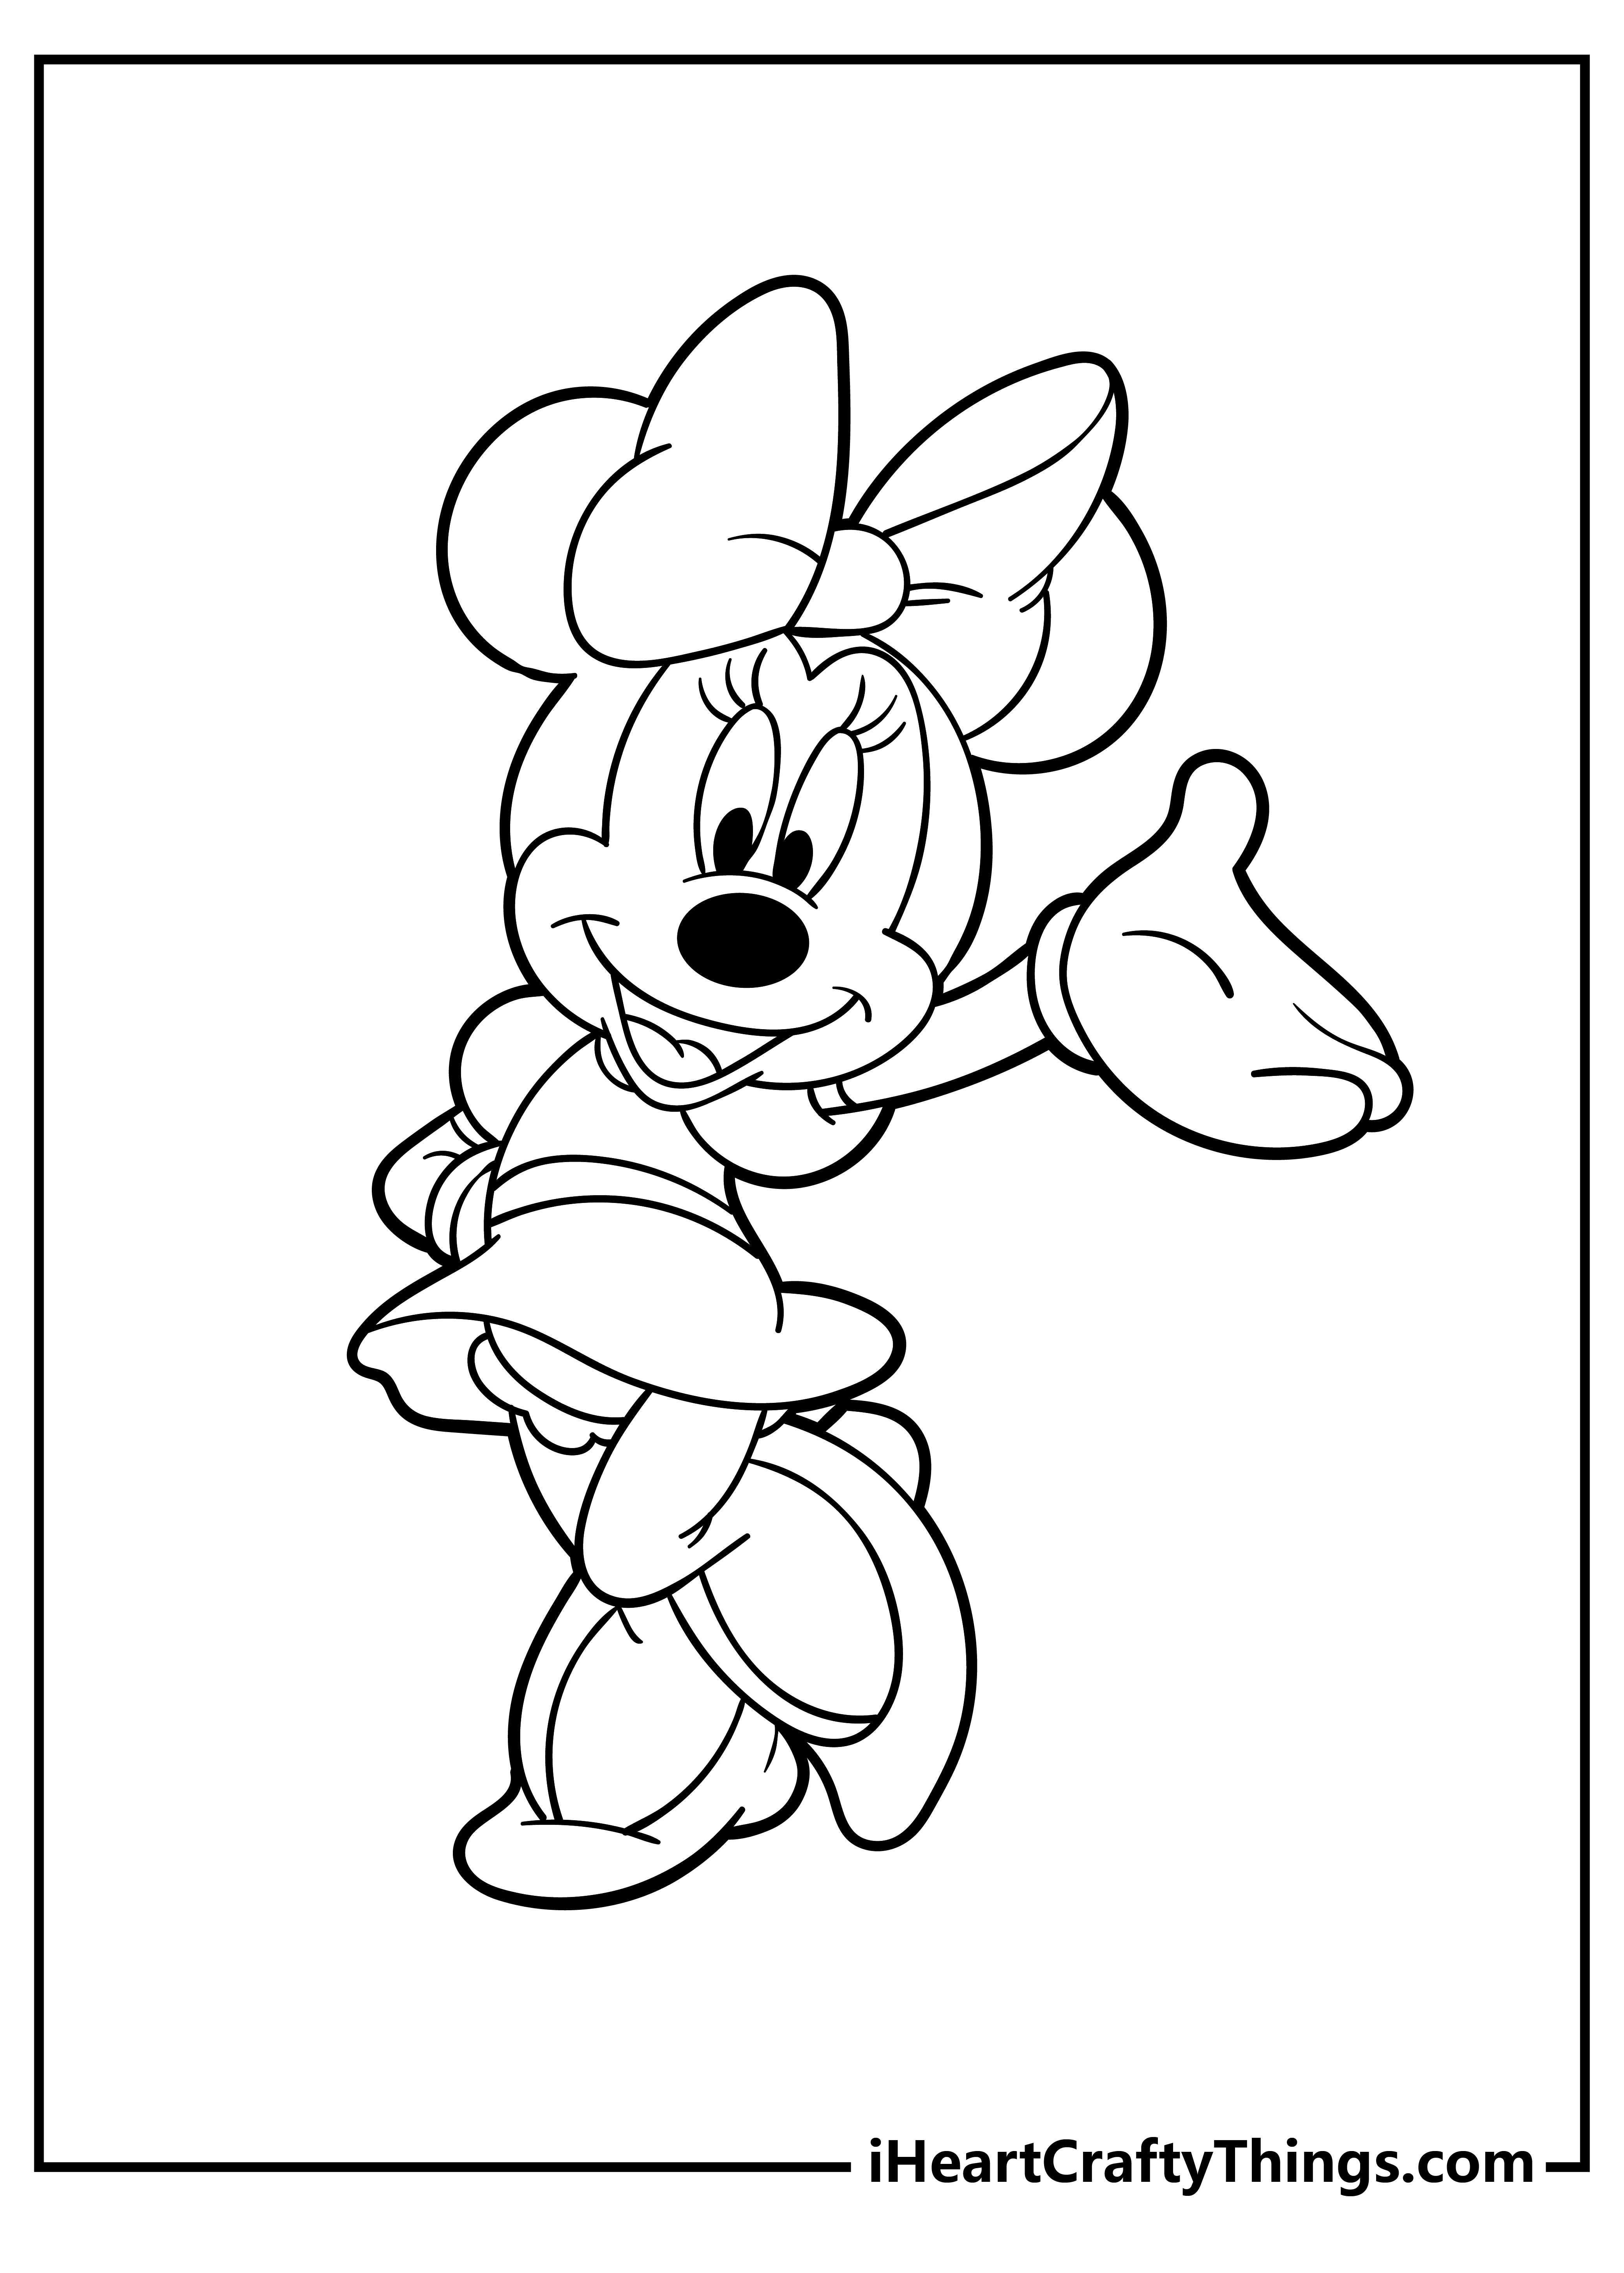 Minnie Mouse Coloring Pages for kids free download